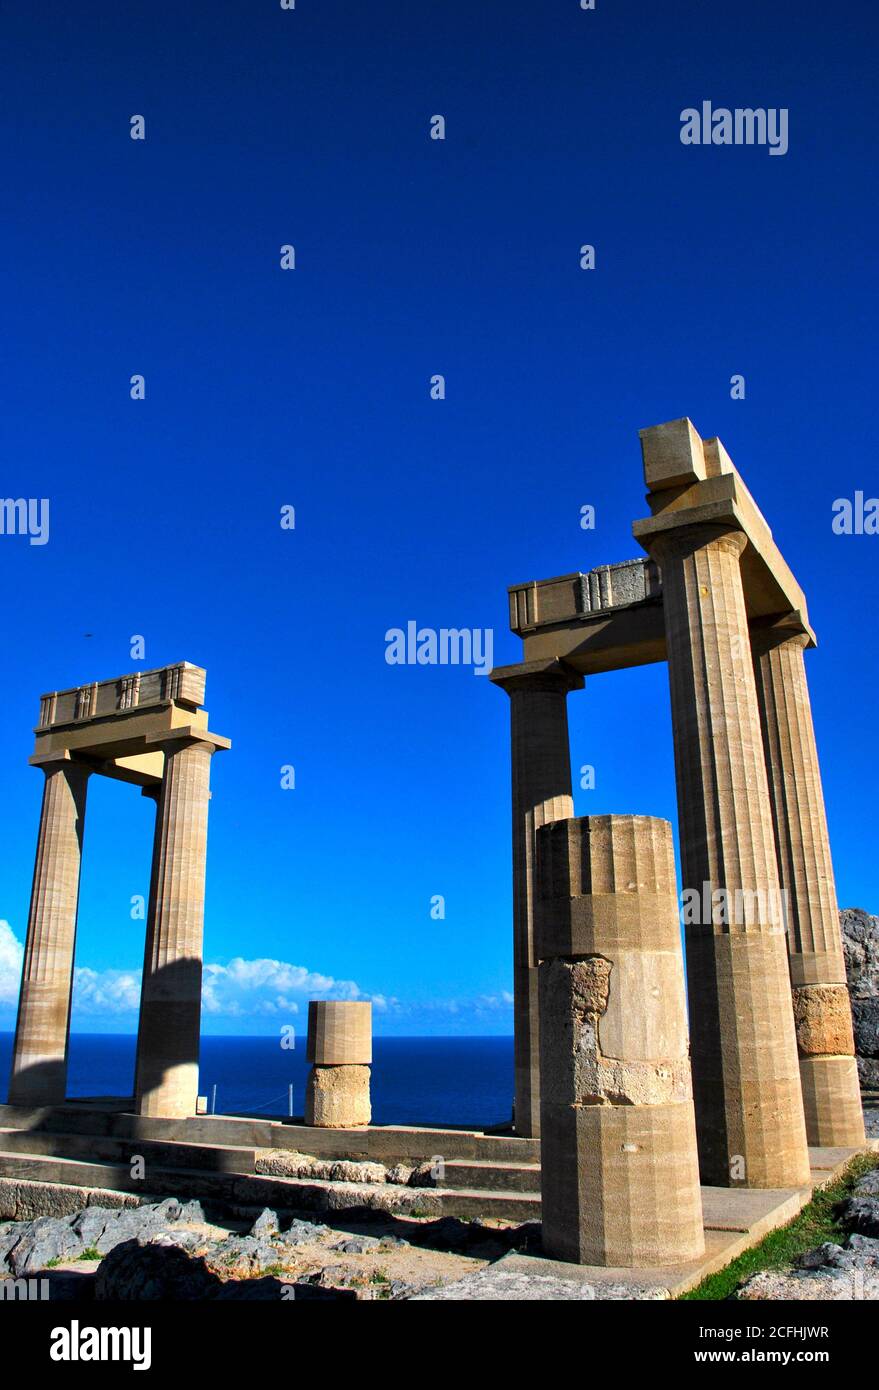 View of the Acropolis in Lindos, Greece Stock Photo